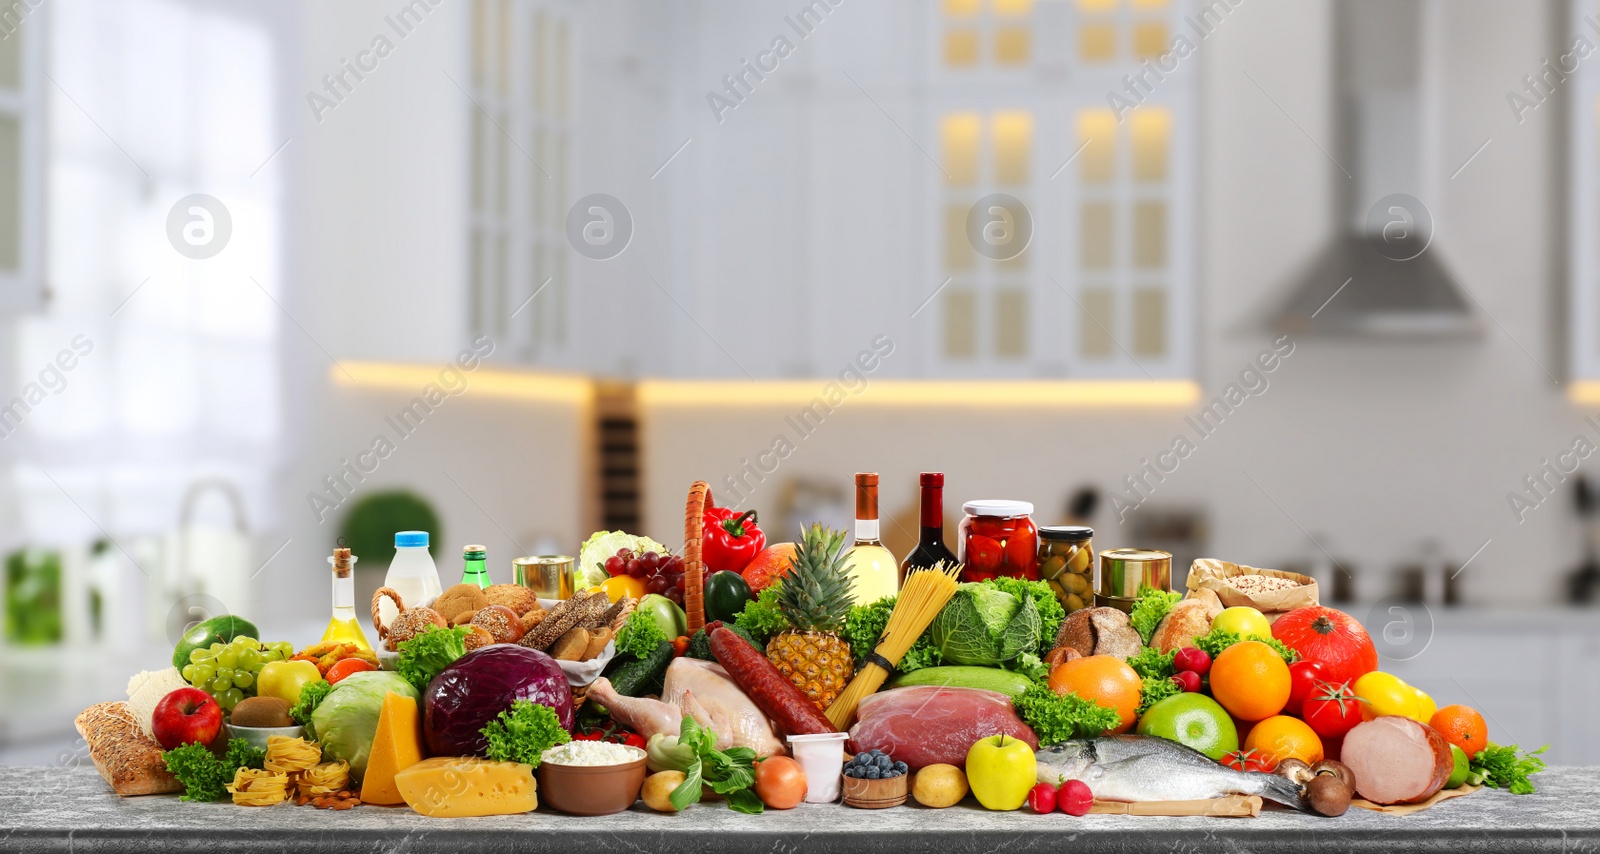 Image of Different products on wooden table in kitchen. Healthy food and balanced diet